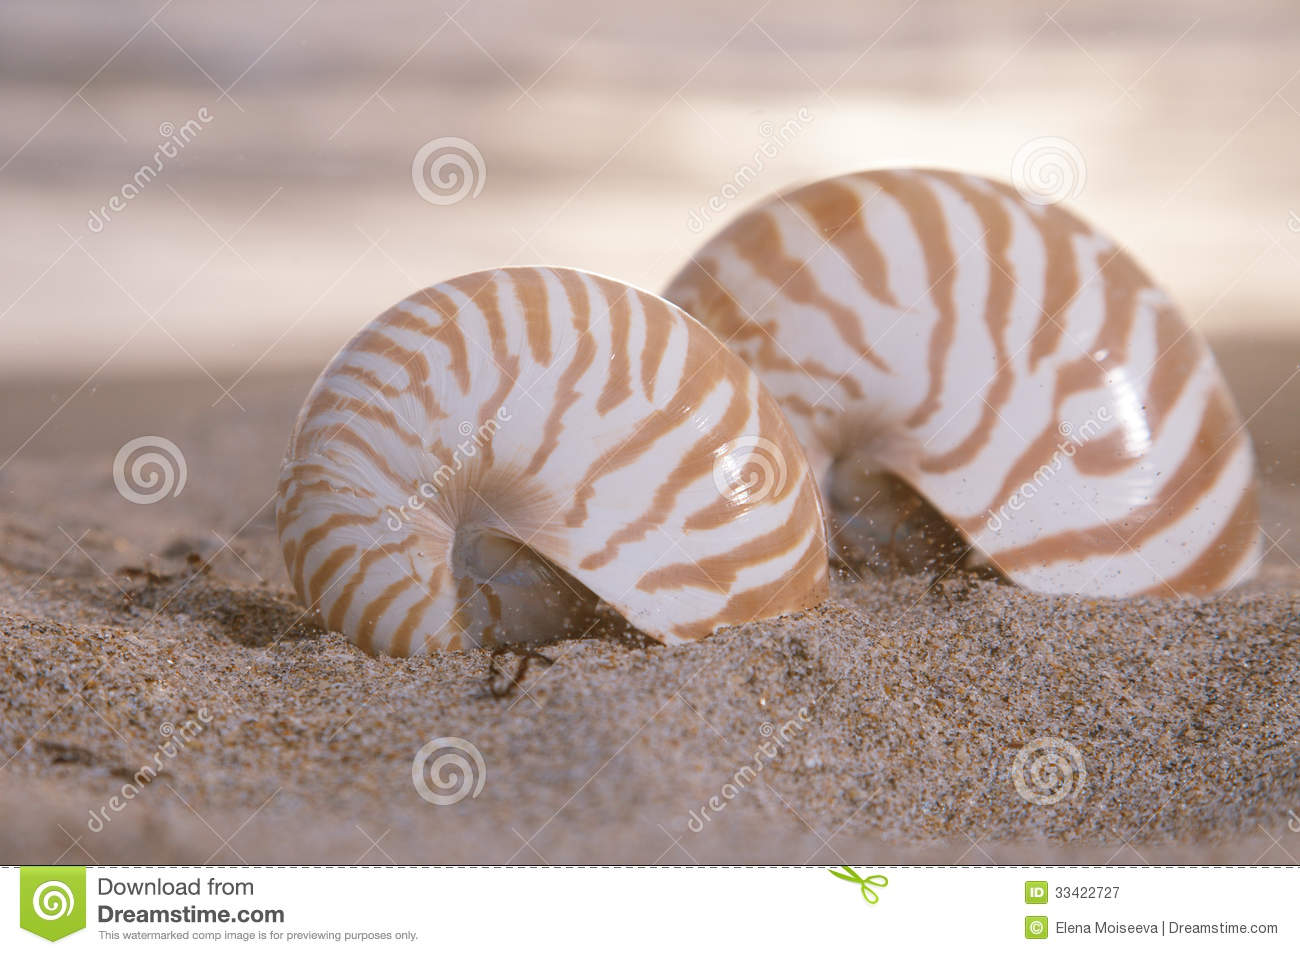 Two Nautilus Shells On Beach Sunrise And Tropical Sea Royalty Free